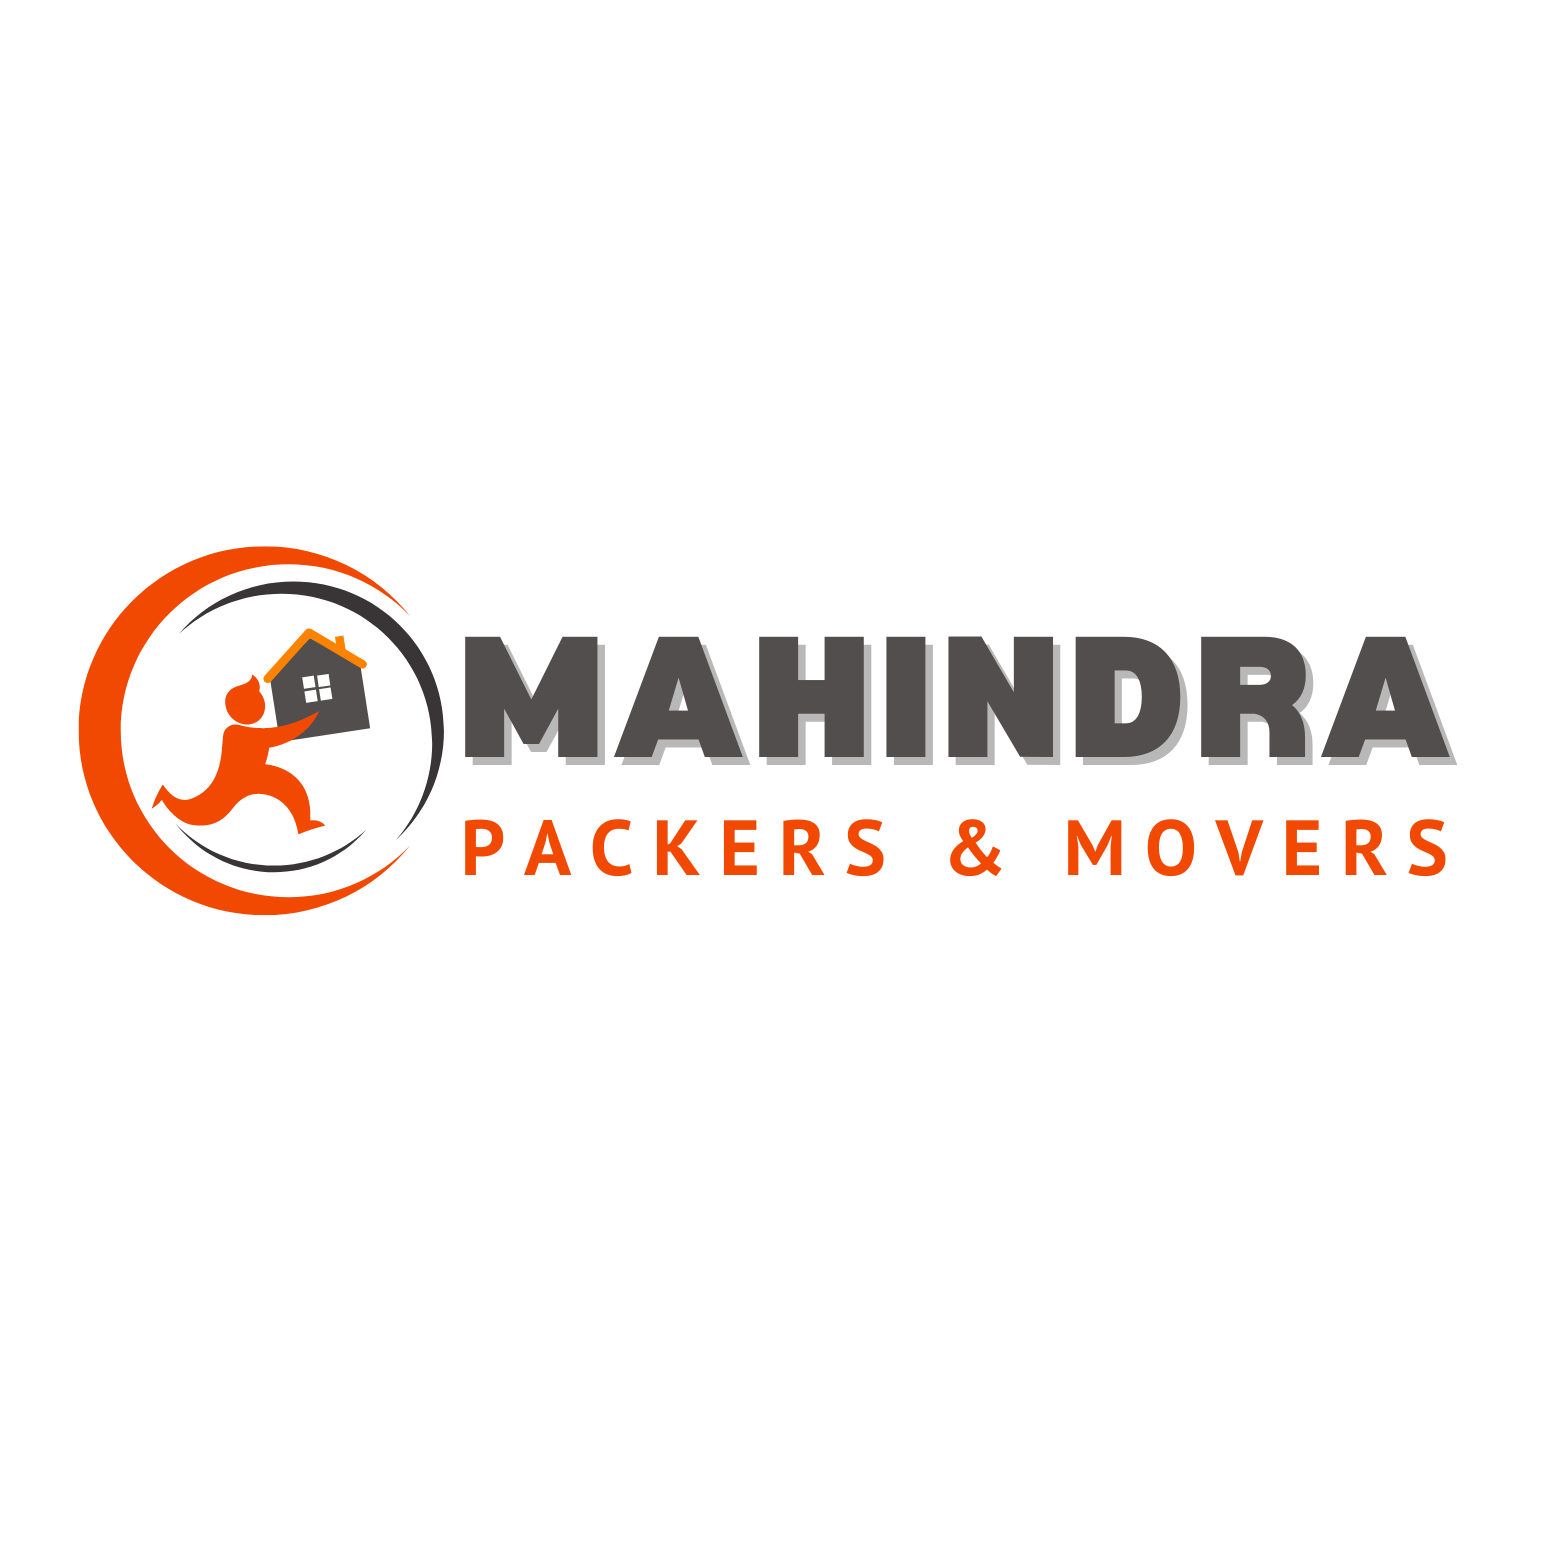 Mahindra Packers and Movers